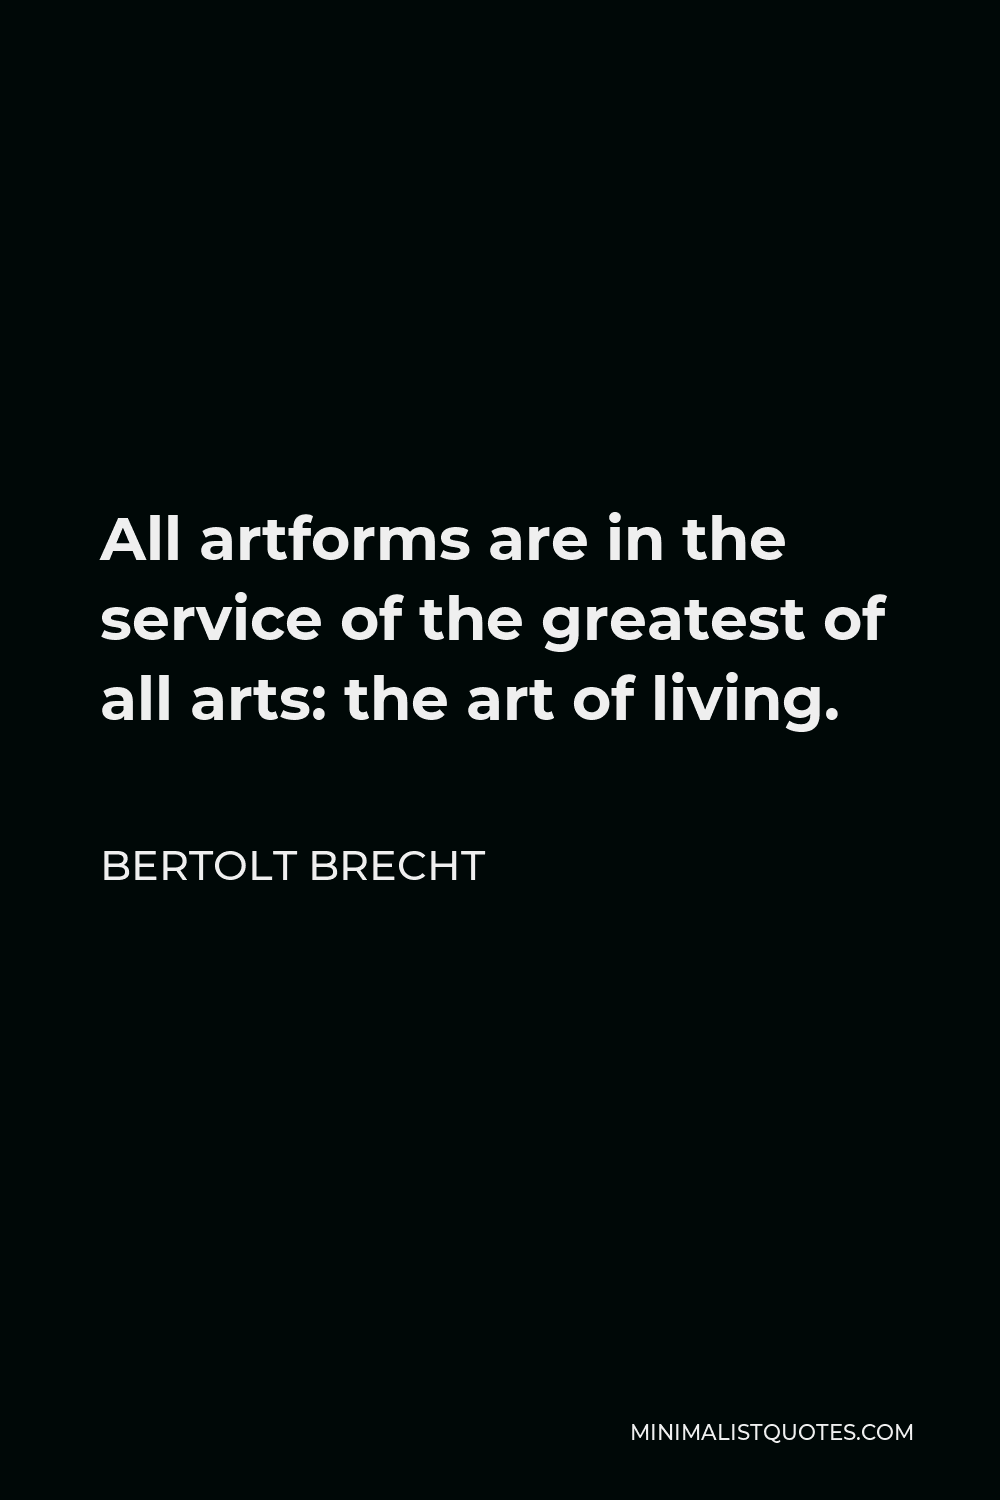 Bertolt Brecht Quote - All artforms are in the service of the greatest of all arts: the art of living.